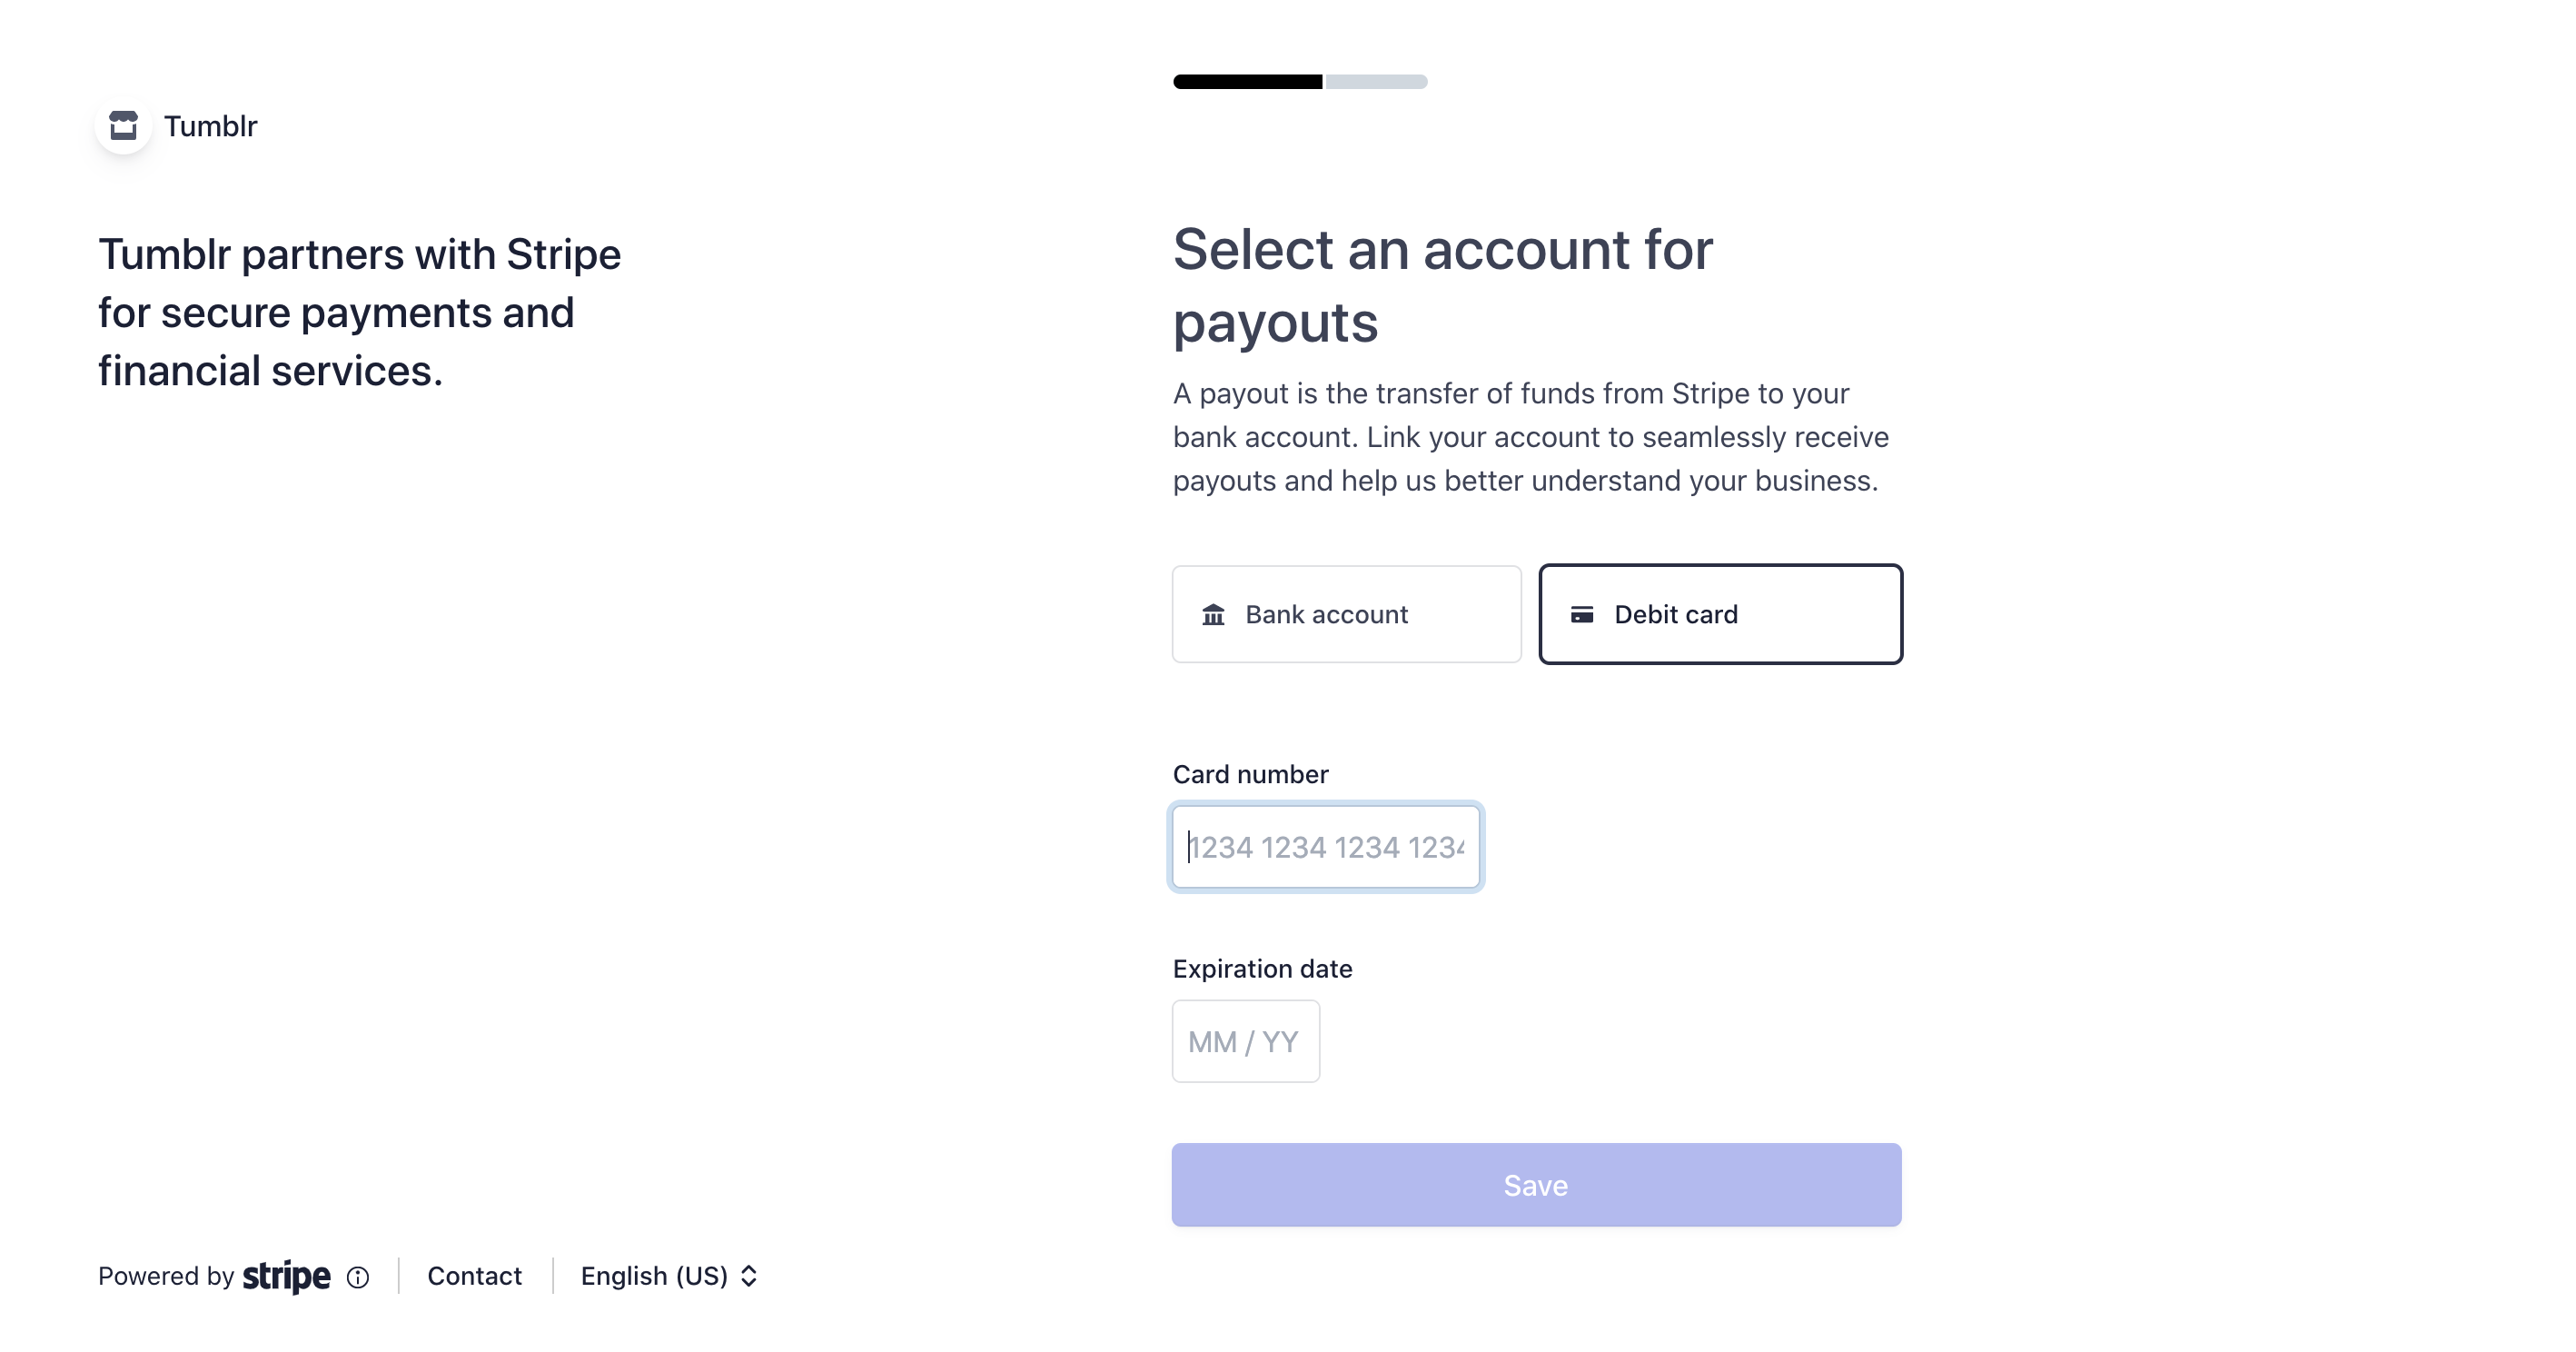 It's the same page as the previous screenshot, only Debit card is selected instead of Bank account. There's a field to enter your card number, and another field for the expiration date.